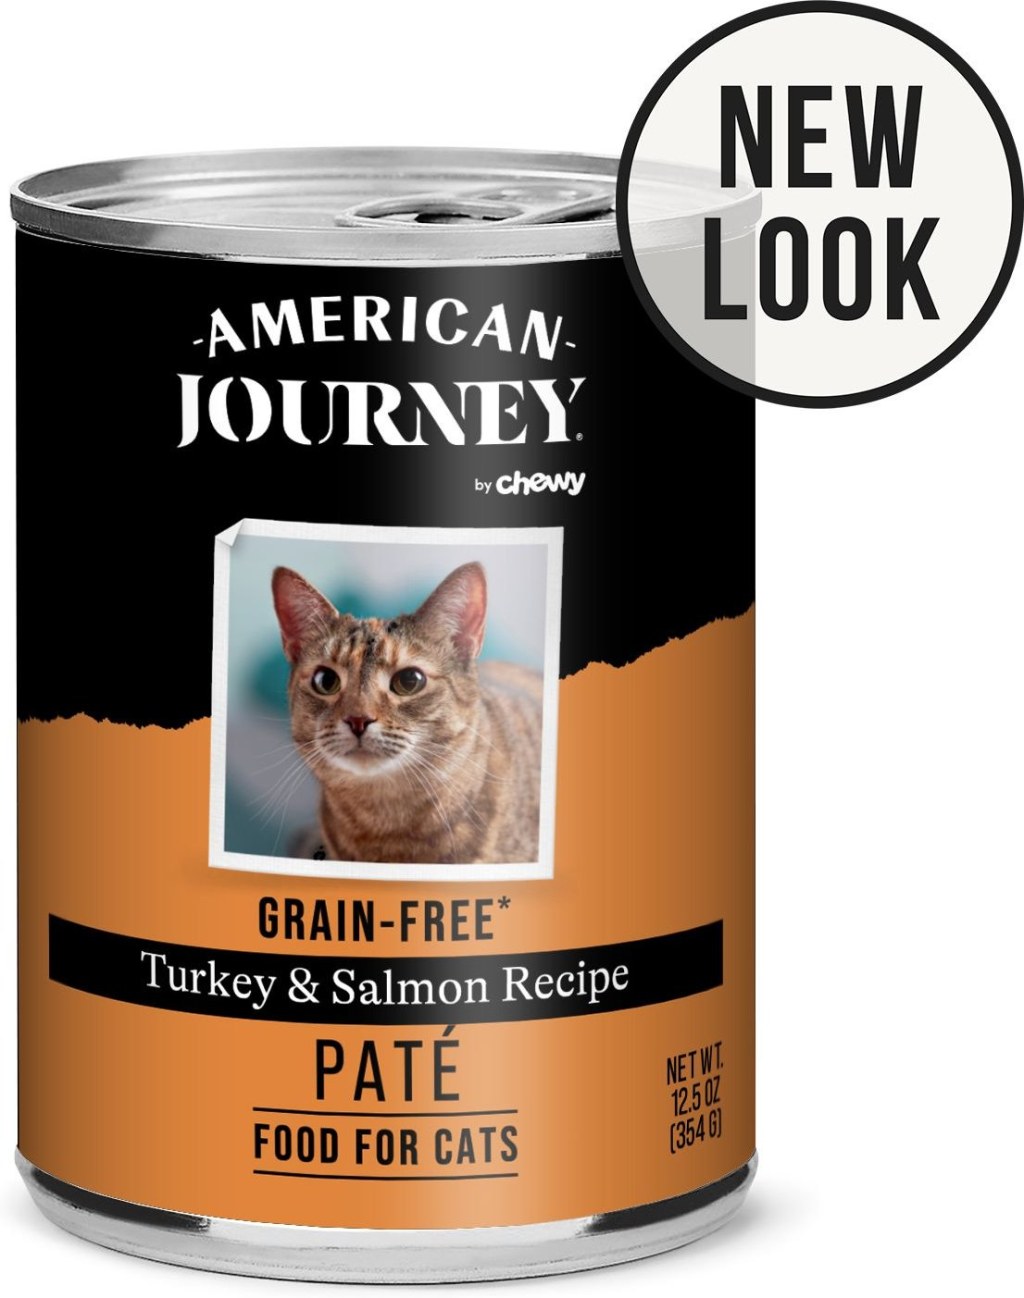 Picture of: American Journey Pate Turkey & Salmon Recipe Grain-Free Canned Cat Food